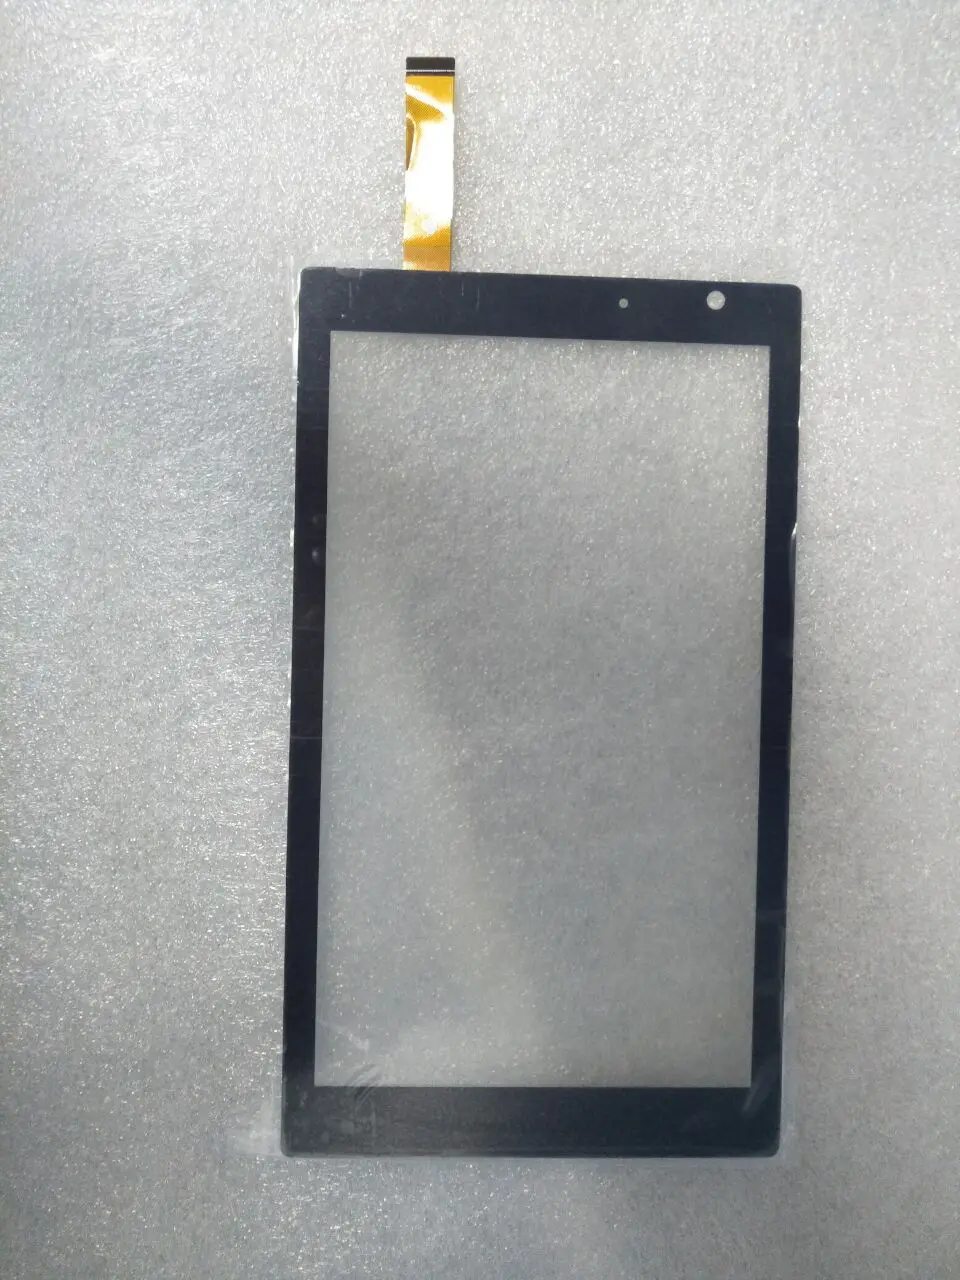 

New Touch screen Digitizer For lwcb07000810 rev-a1 7" Tablet Touch panel Glass Sensor Replacement Free Shipping